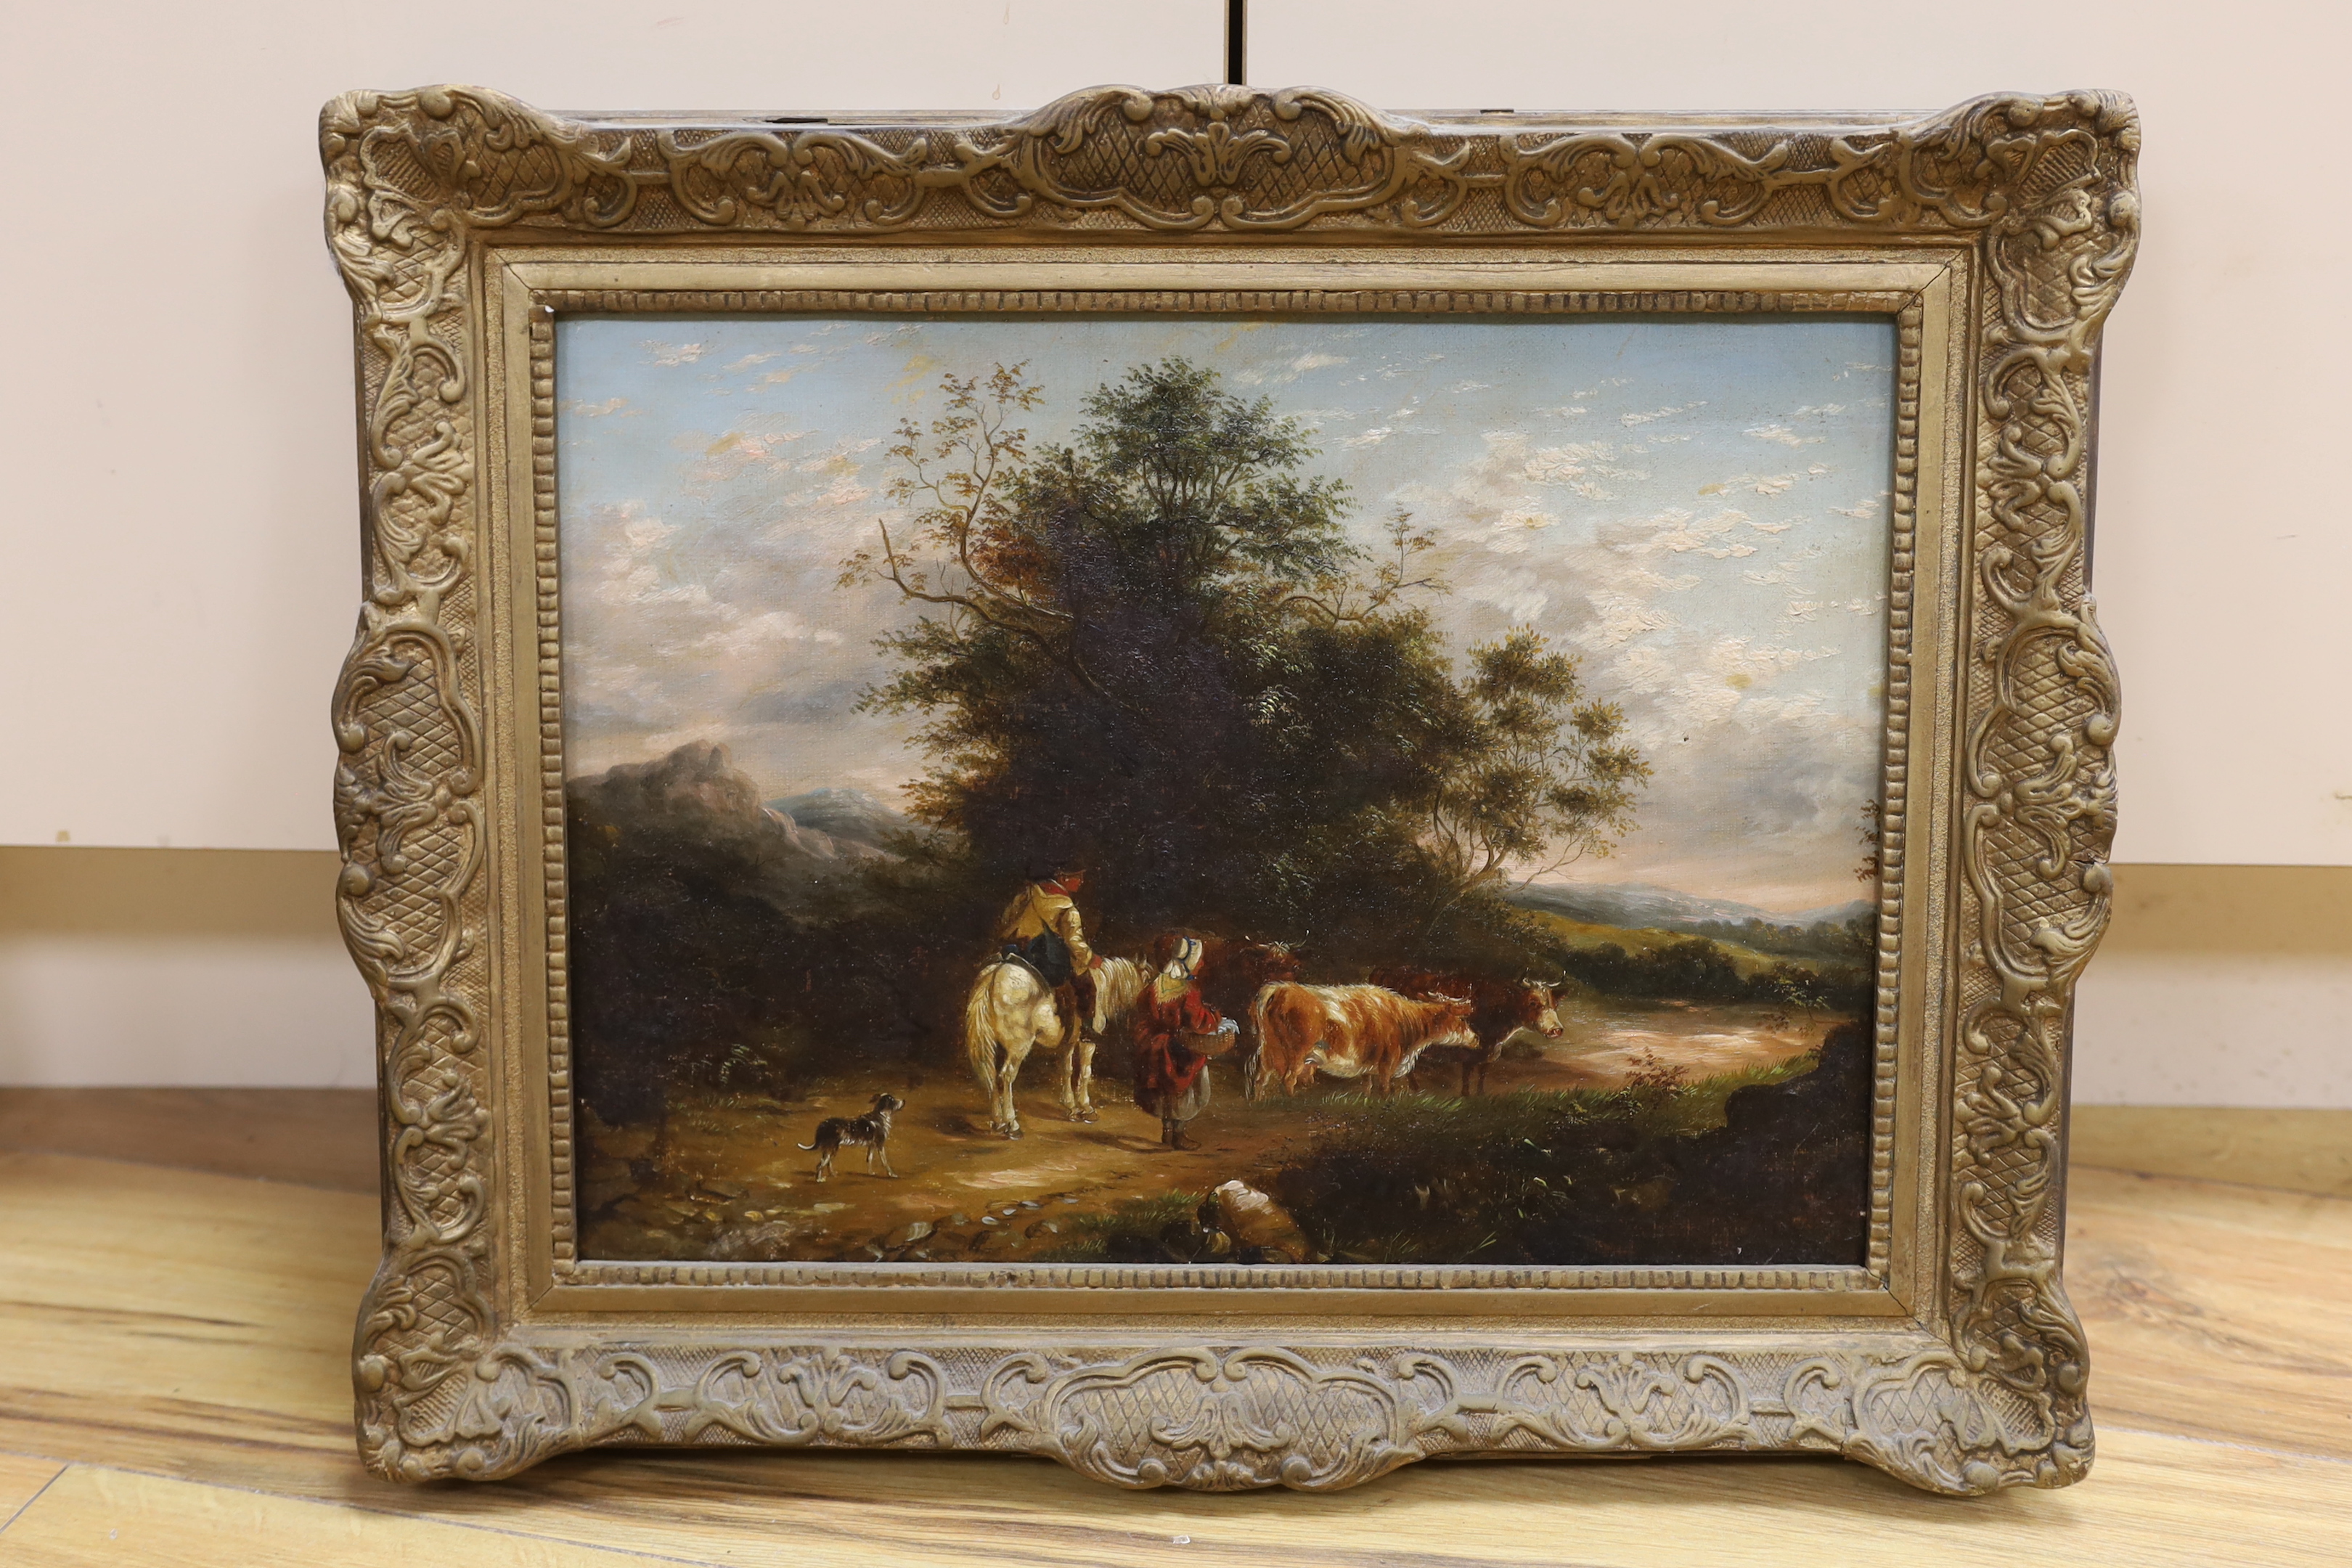 19th century English School, oil on canvas, Cattle being led along a woodland path, unsigned, 29 x 39cm